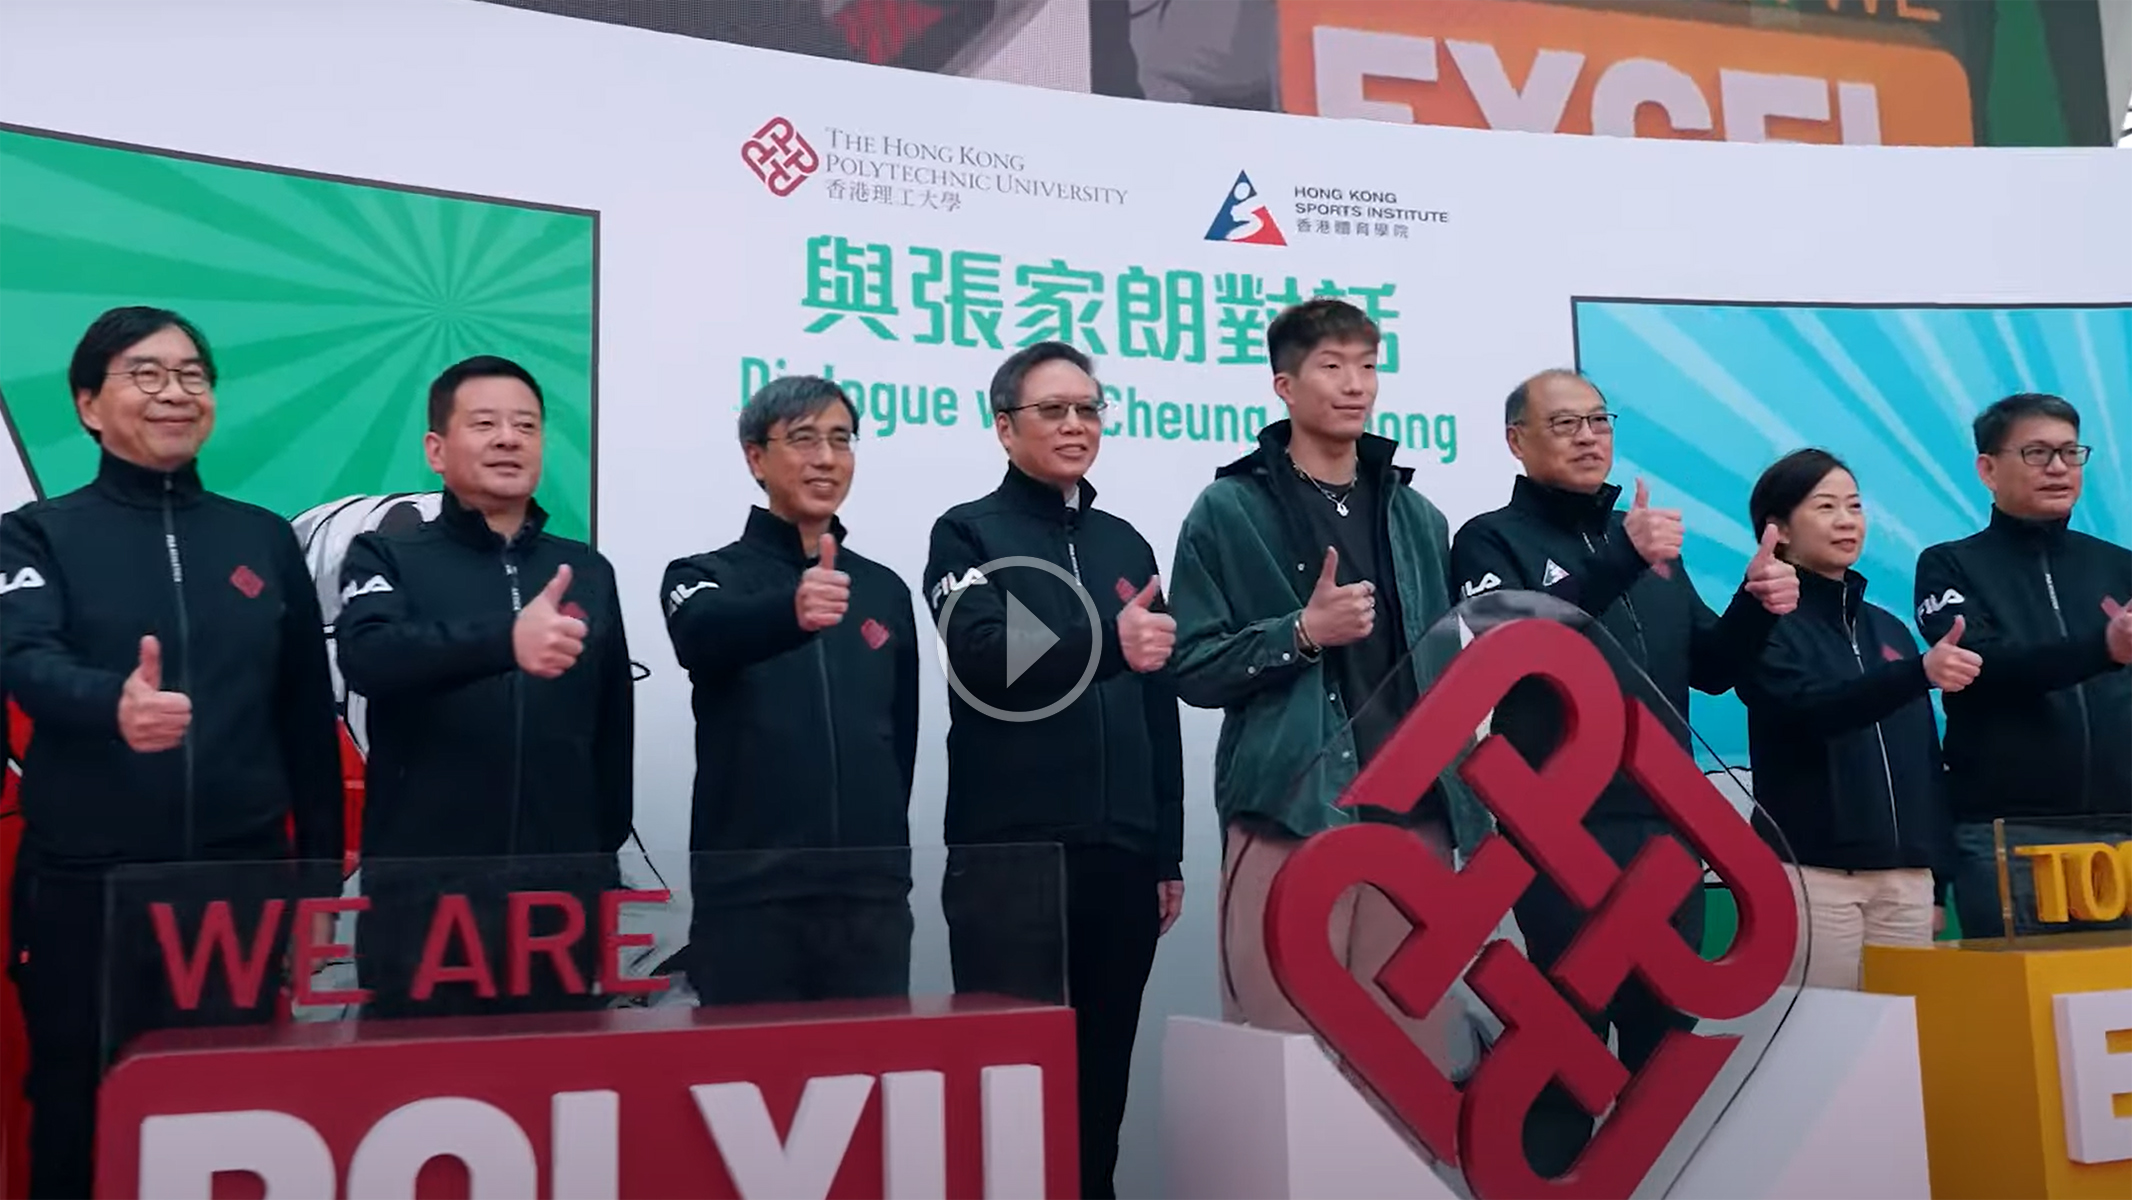 Olympic gold fencer Cheung Ka-long discusses his athletic and personal life with the PolyU community